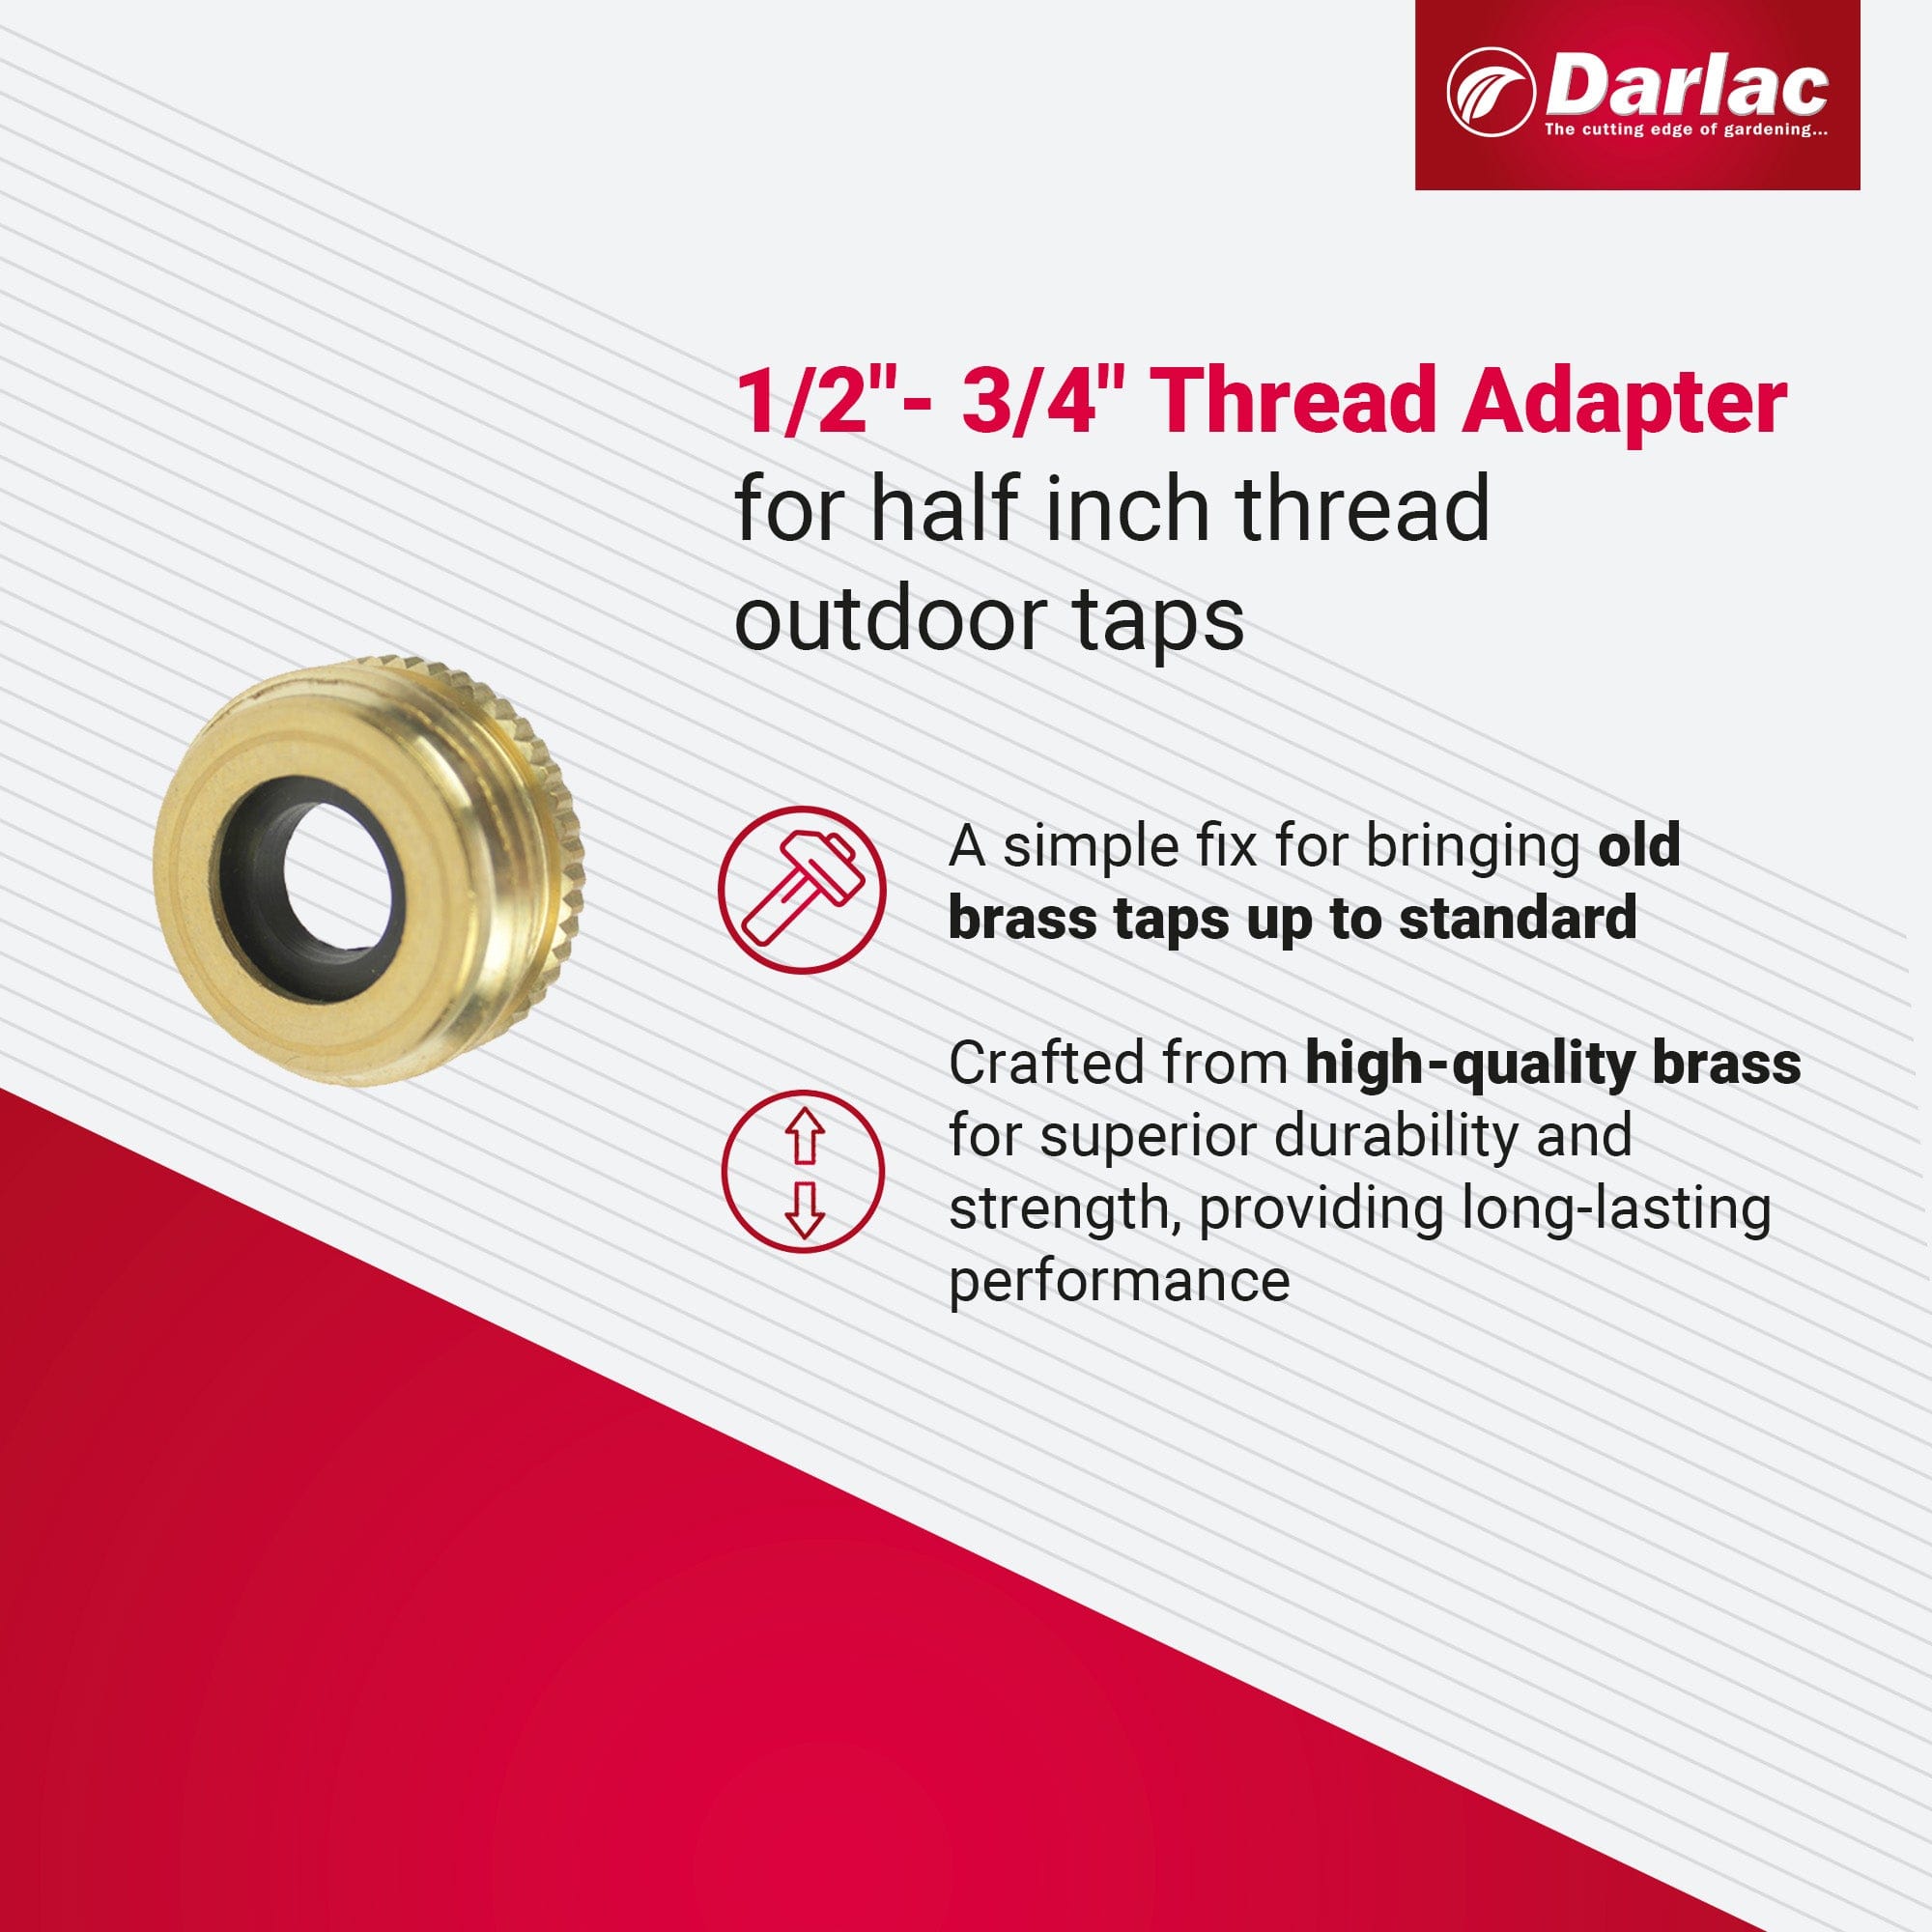 dt-brown HARDWARE Darlac 1/2" - 3/4" Thread Adapter